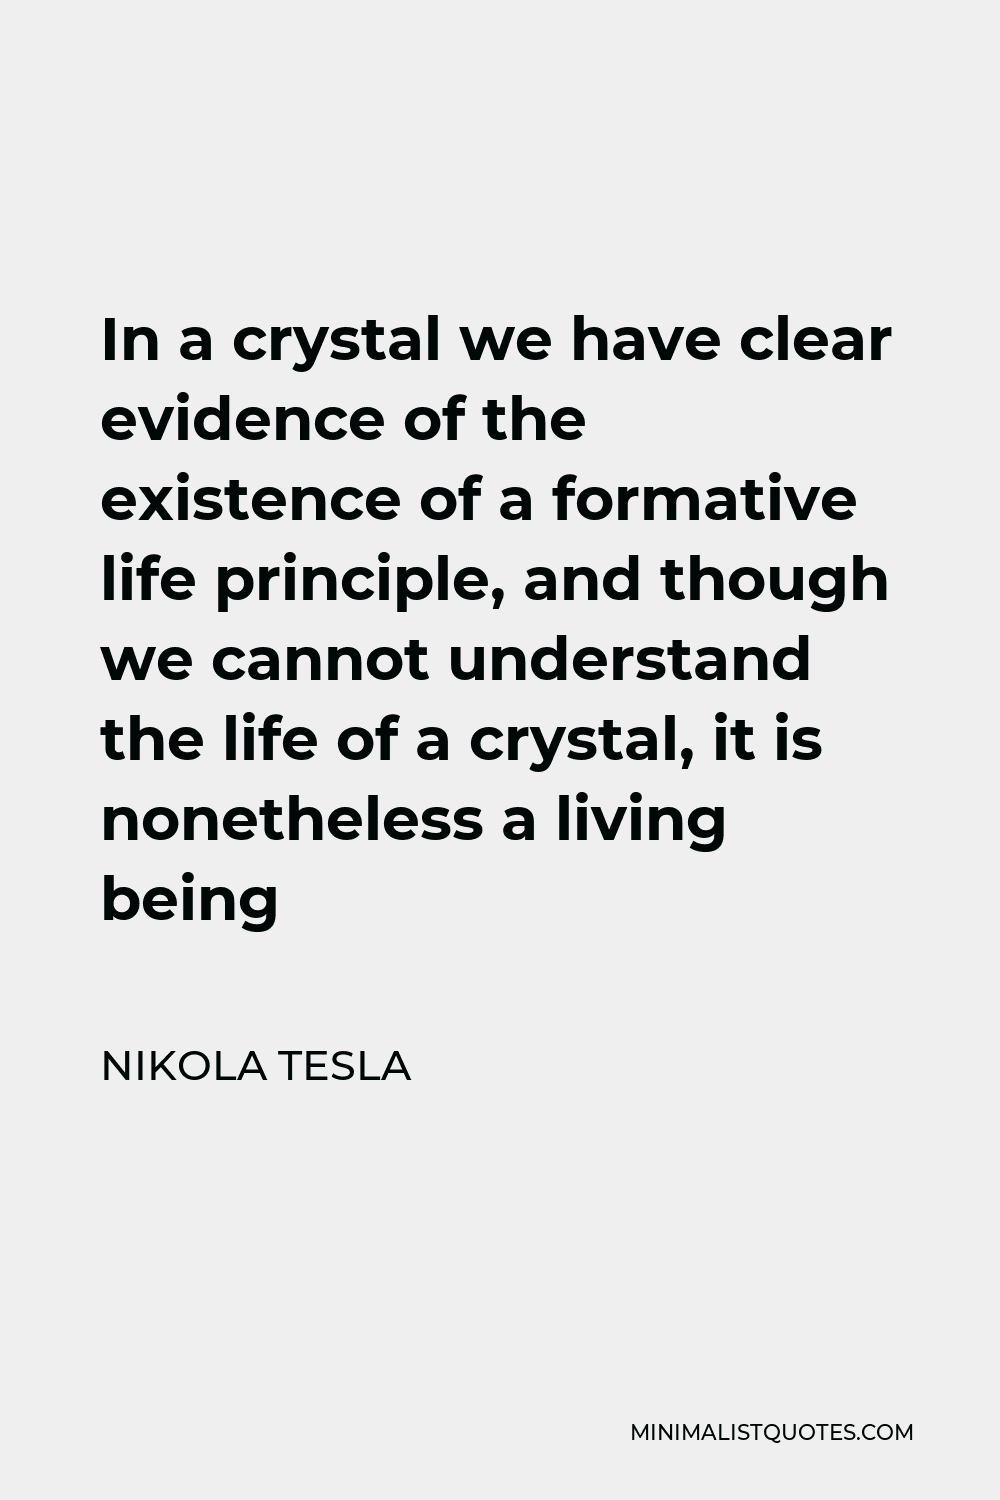 Nikola Tesla Quote - In a crystal we have clear evidence of the existence of a formative life principle, and though we cannot understand the life of a crystal, it is nonetheless a living being